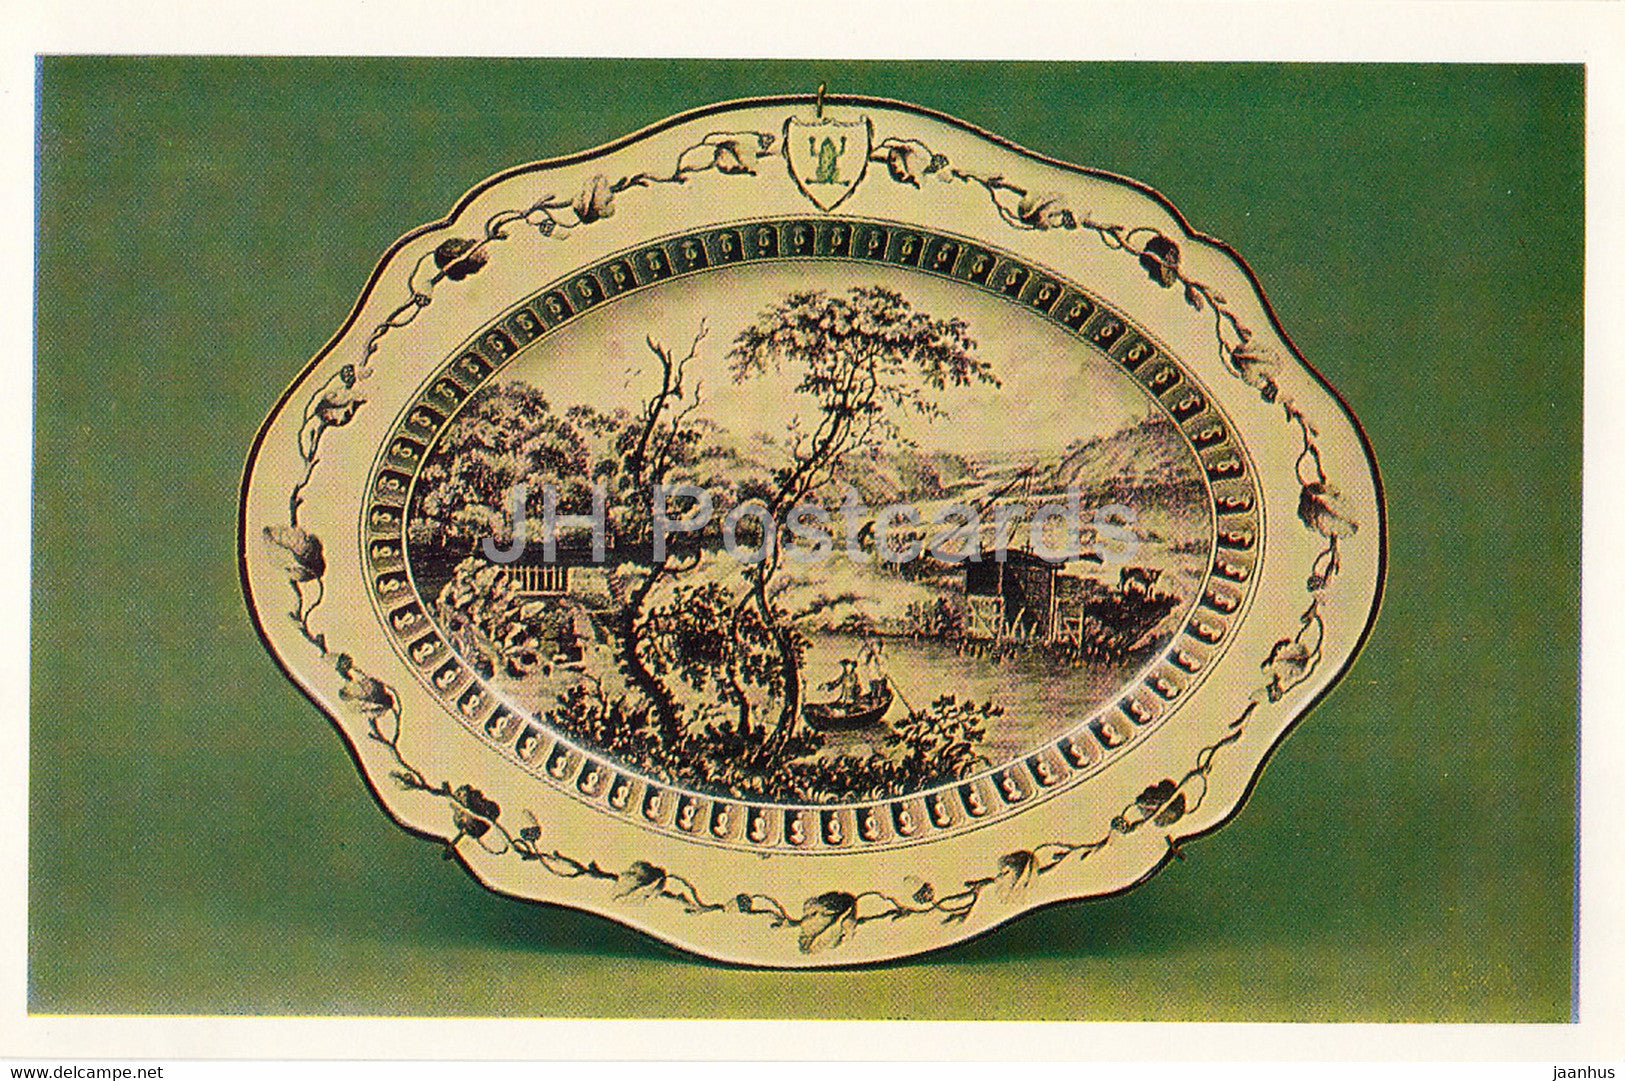 The Hermitage, Leningrad , English Applied Art - Oval Dish. Wedgwood. 1773-74 - Russia - USSR - 1983 - used - JH Postcards